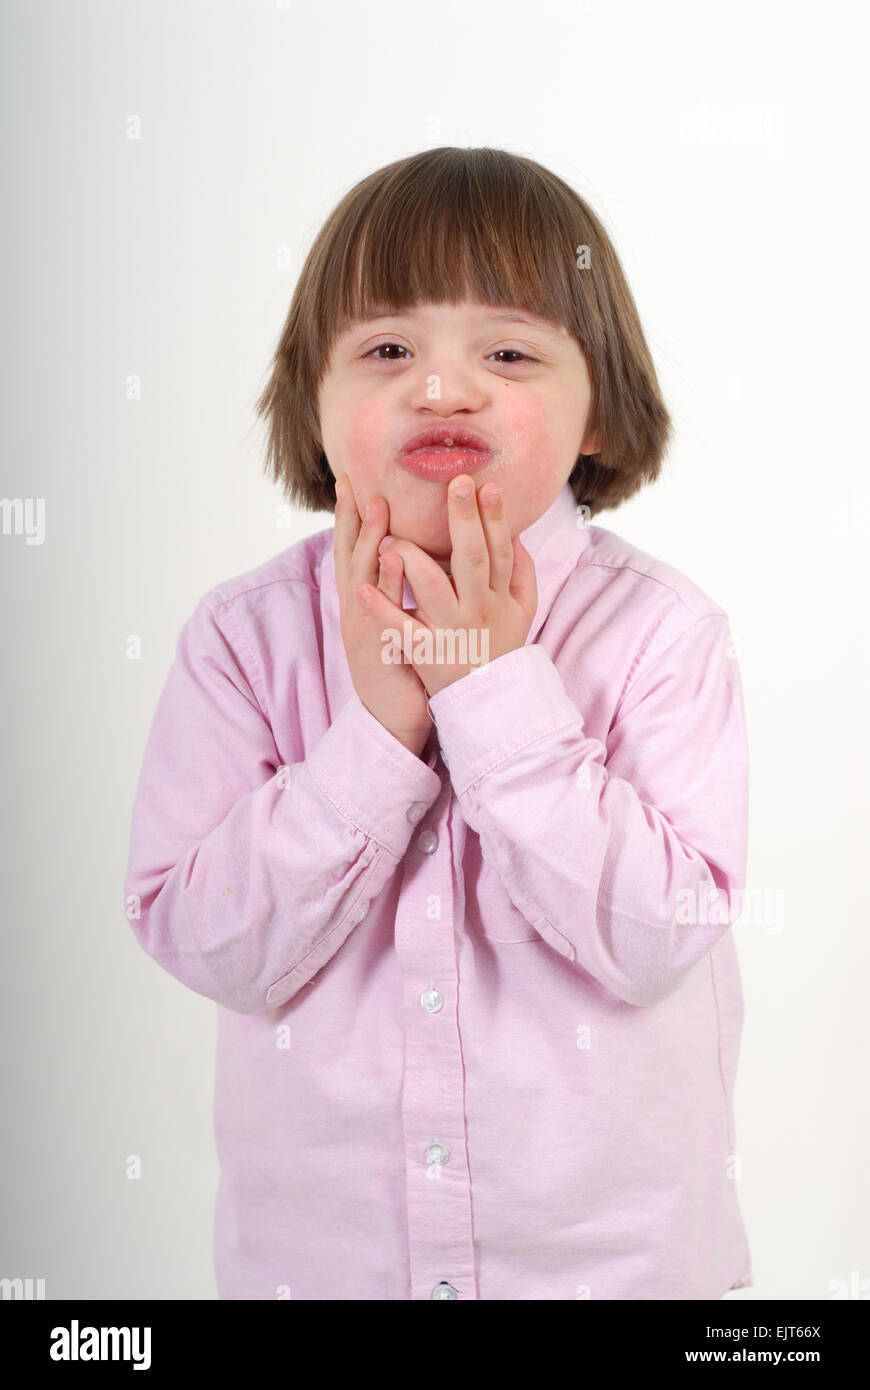 Boy with down syndrome blowing kisses. Isolated on white background. Stock Photo